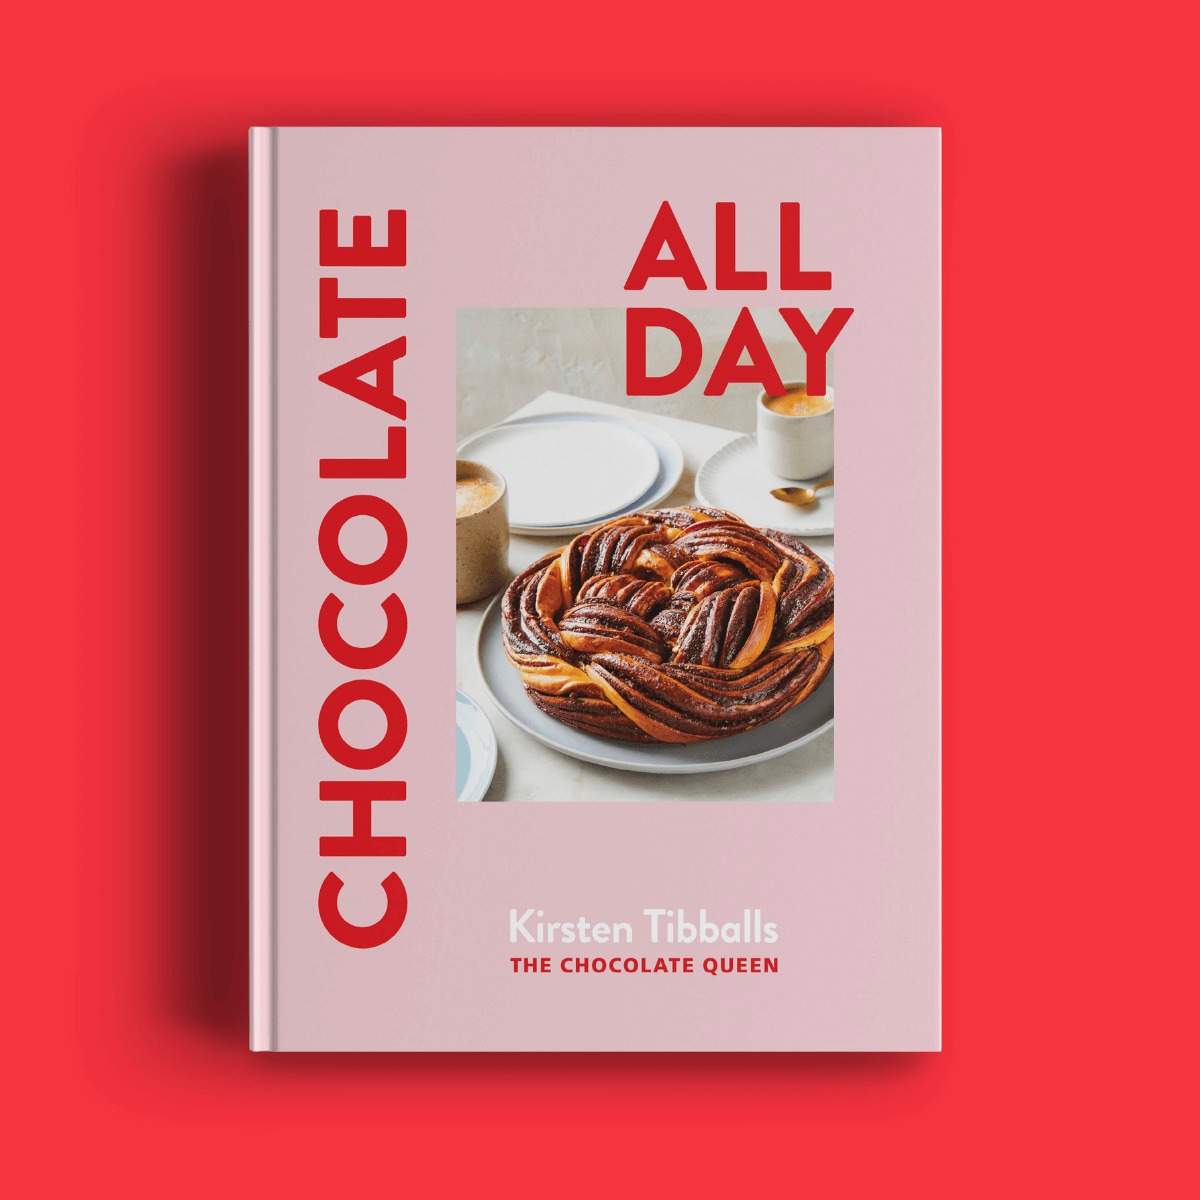 A book titled "Chocolate All Day" on a vibrant red background.